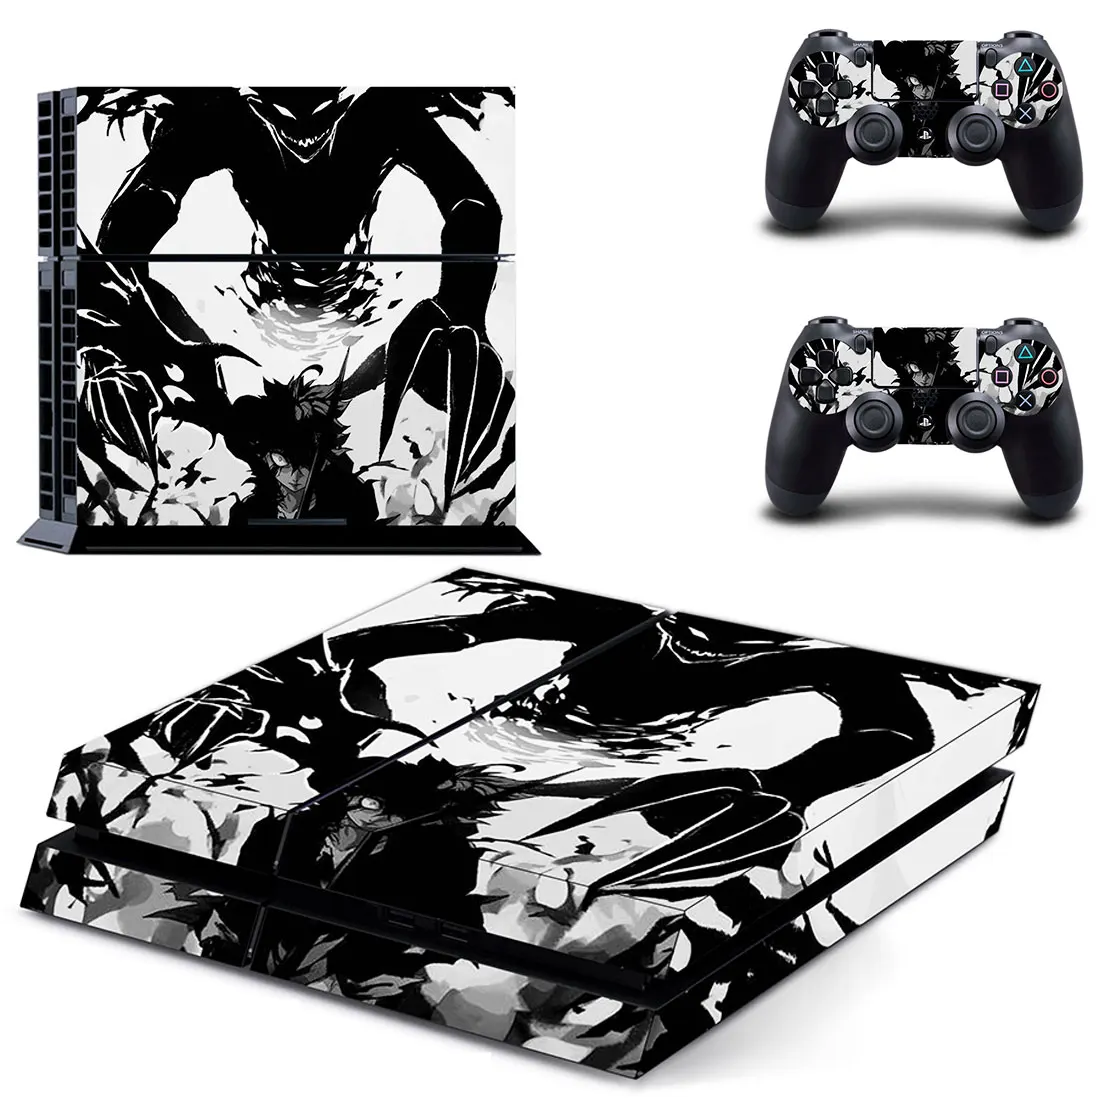 

Black Clover PS4 Stickers Play station 4 Skin Sticker Decals For PlayStation 4 PS4 Console & Controller Skins Vinyl